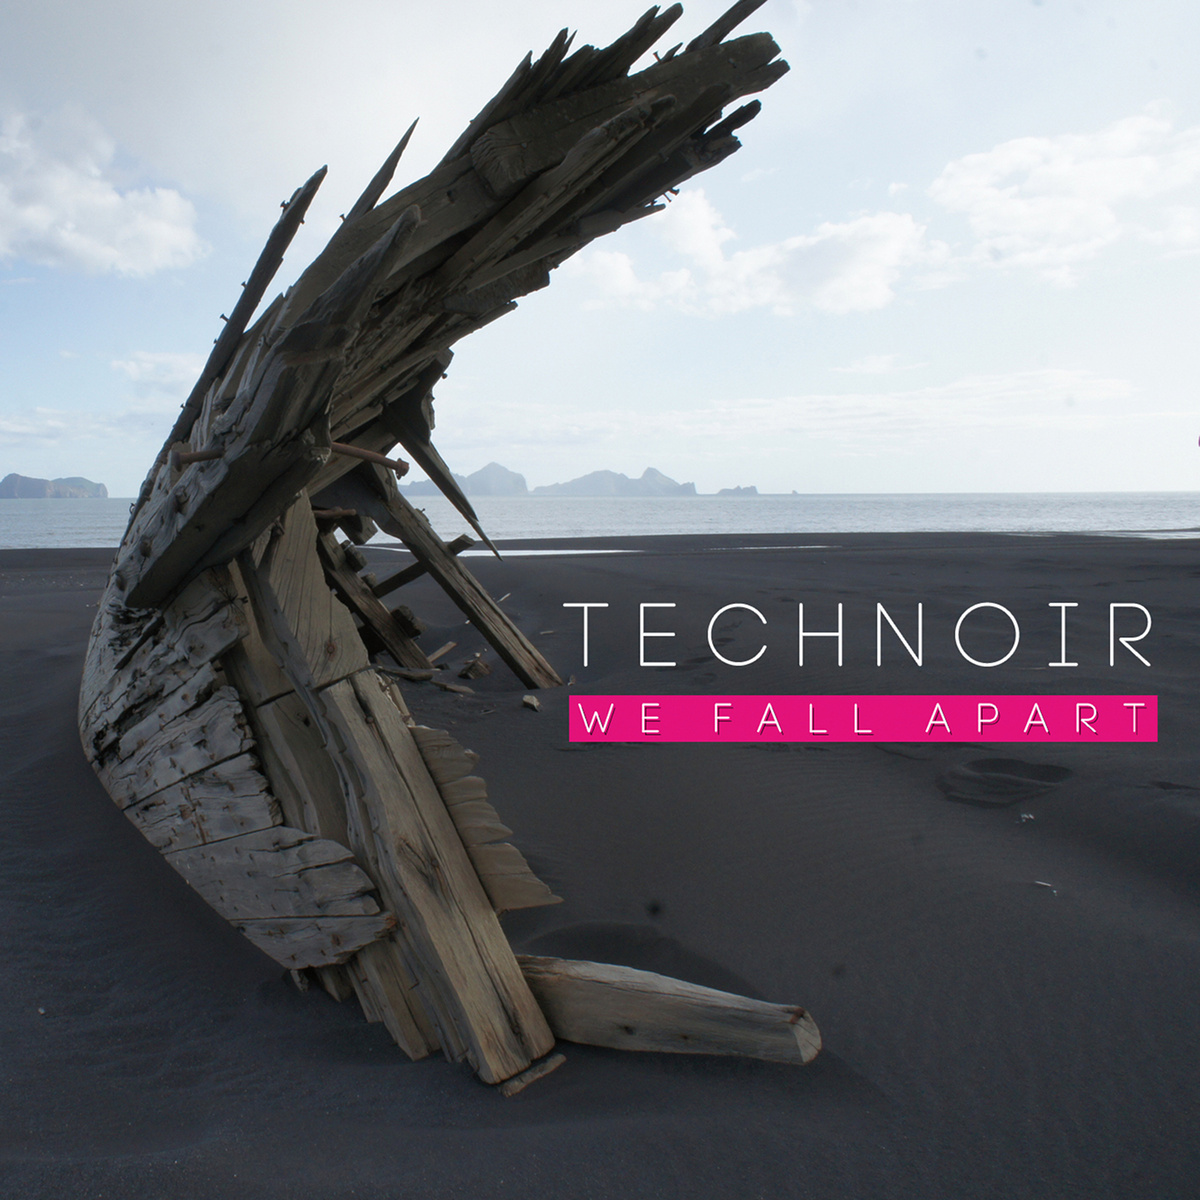 Technoir - We Fall Apart 2013, Electro, Synth Pop, Germany. 